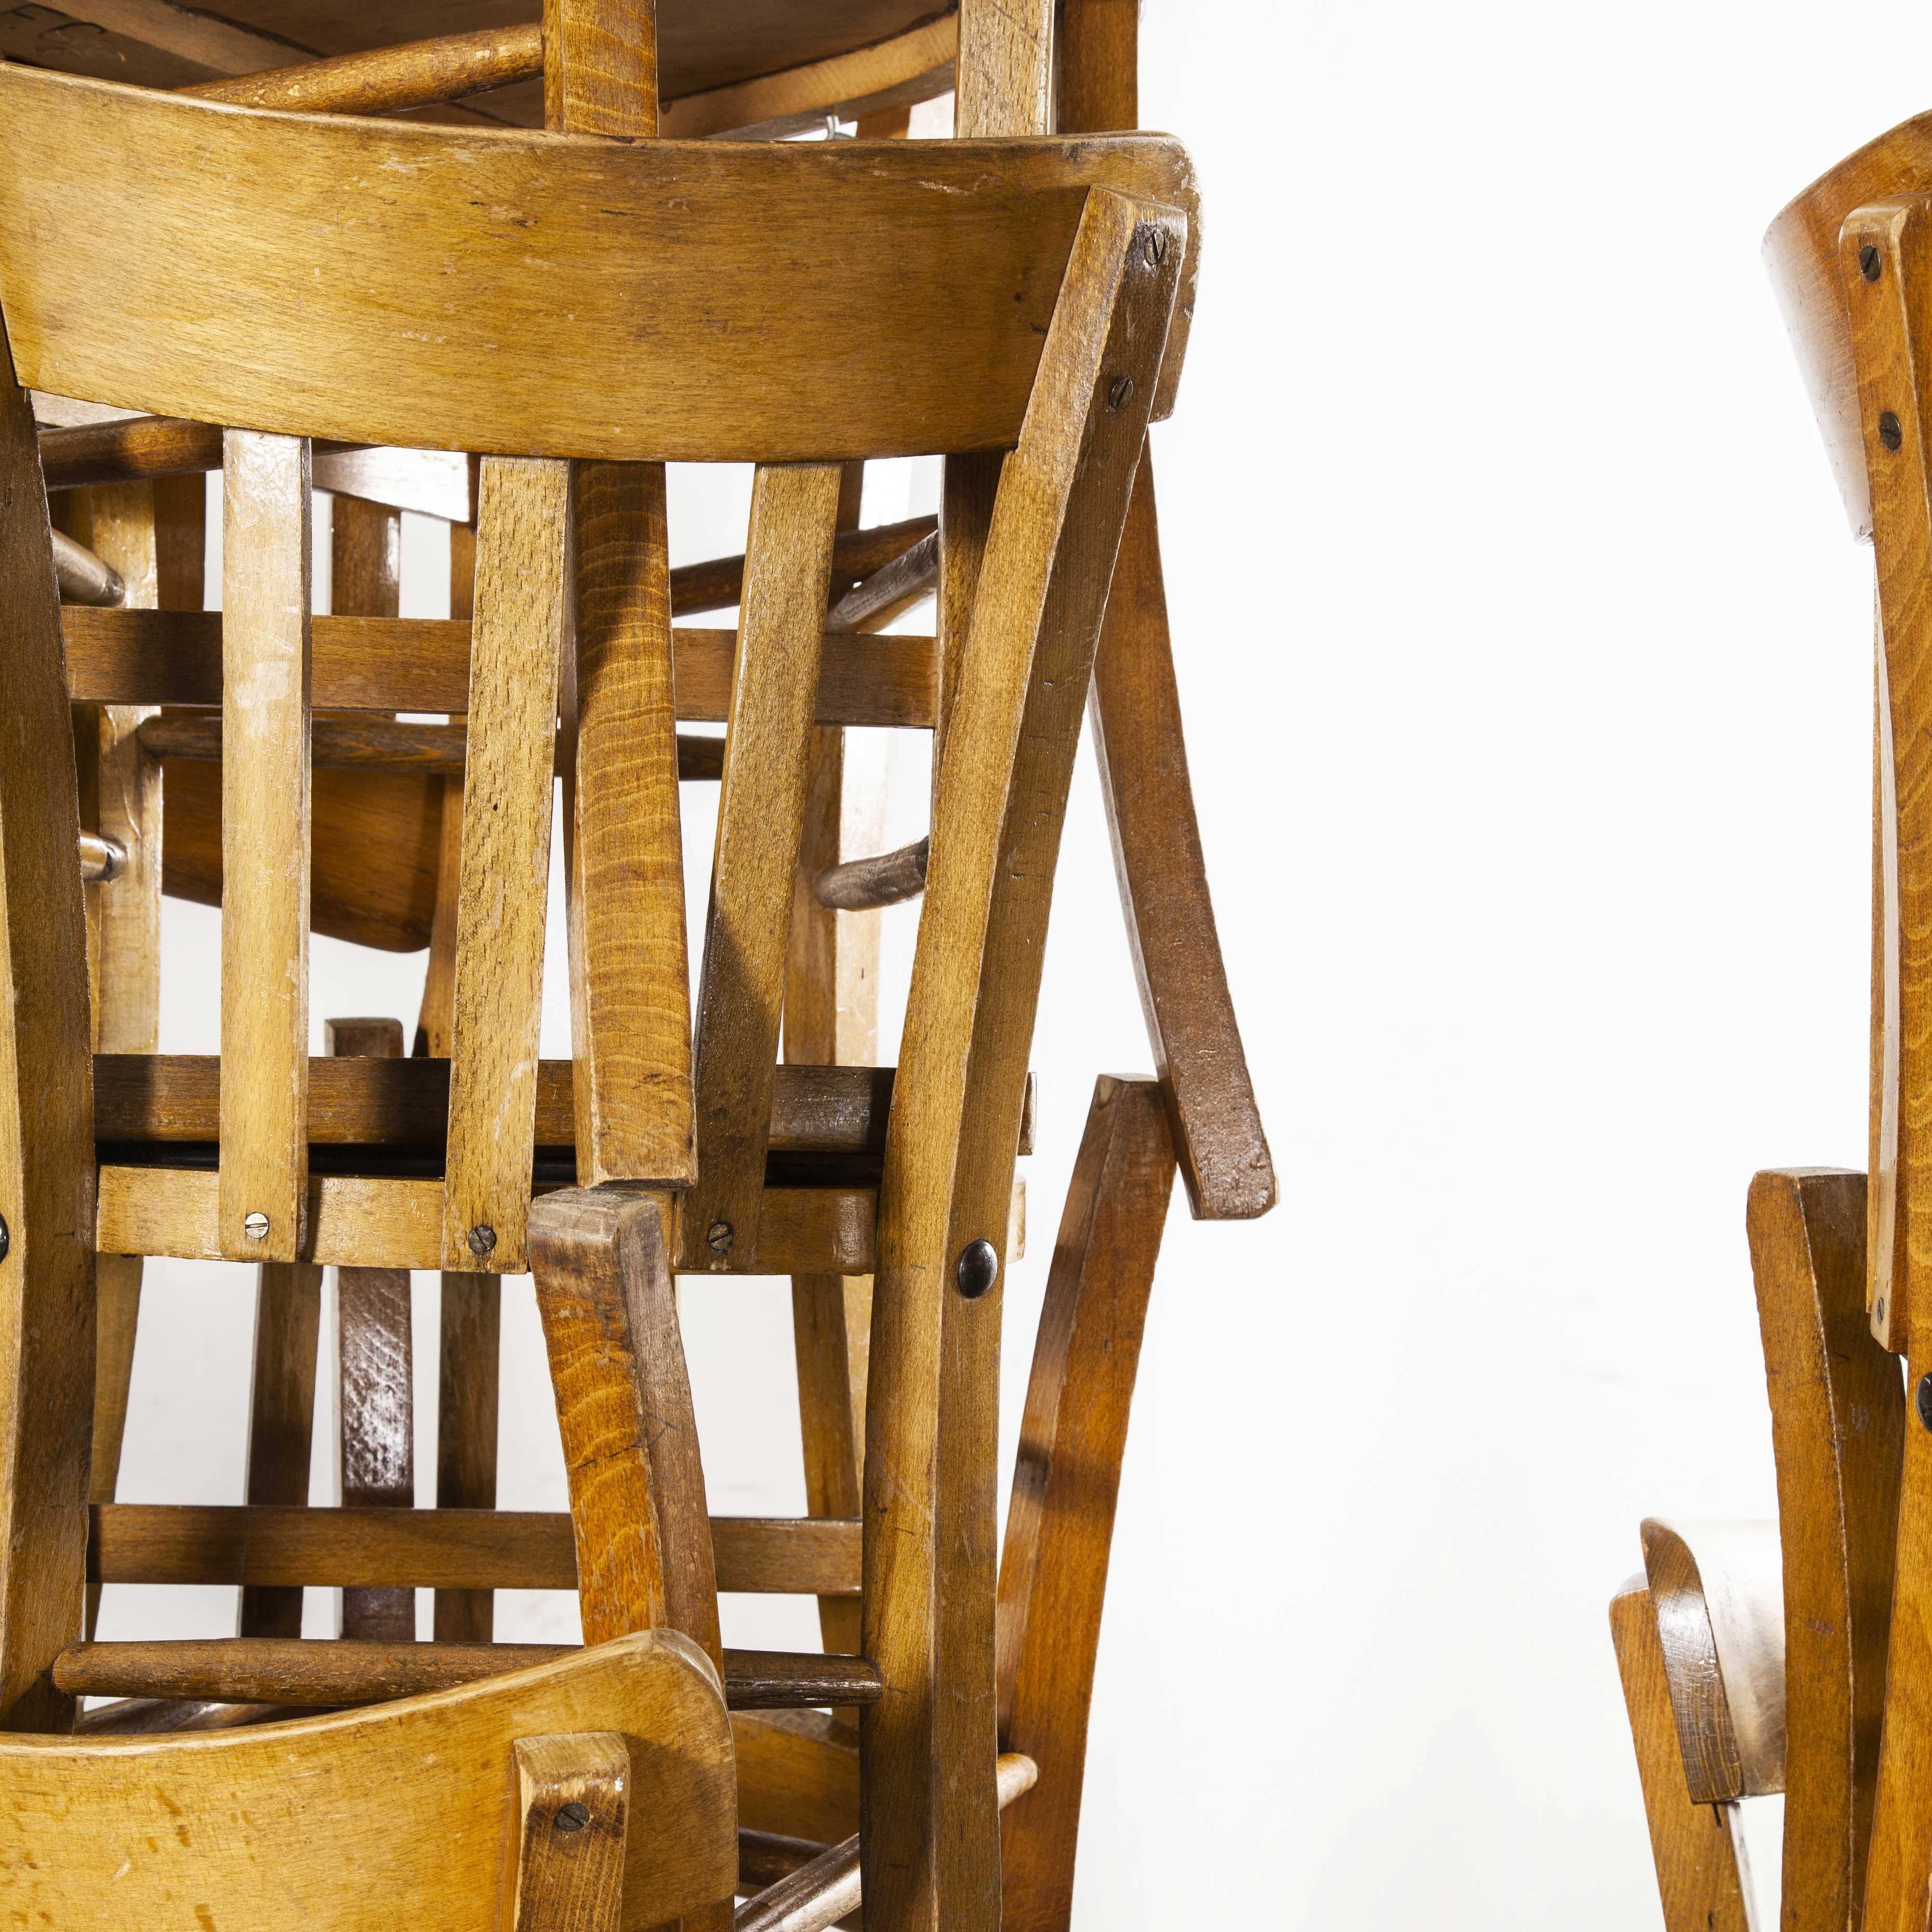 1950s French made Luterma bentwood dining chairs – Various quantities available. (Model 3). The process of steam bending beech to create elegant chairs was discovered and developed by Thonet, but when its patents expired in 1869 many companies